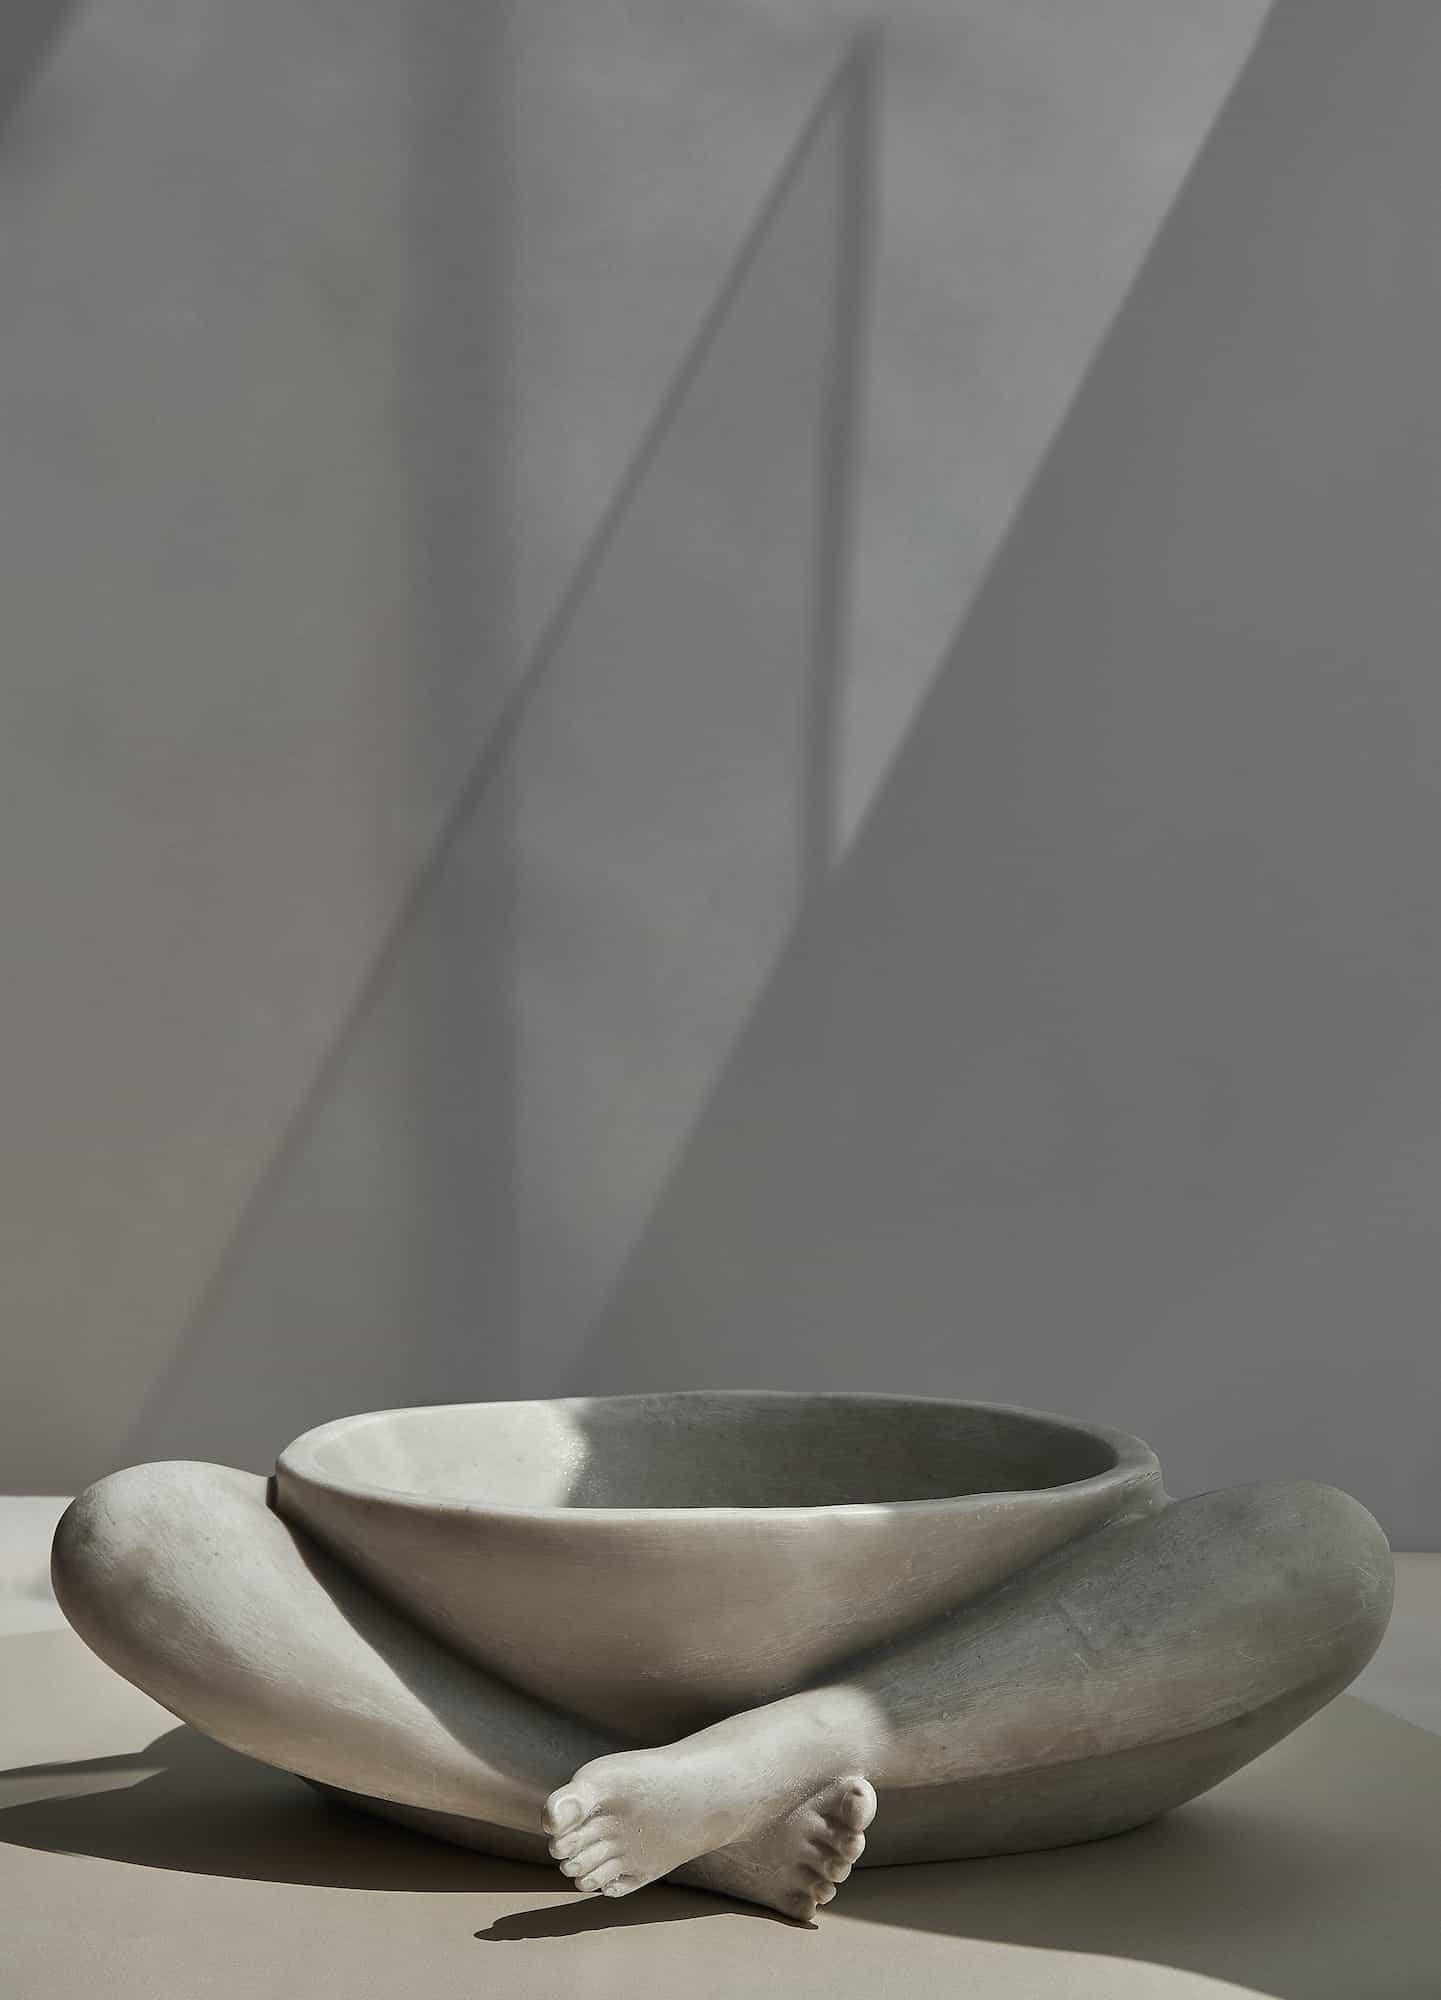 Small Sukhasana II Bowl by Marcela Cure
Dimensions: W 22.5 x D 30 x H 12.5 cm
Materials: Resin and Stone Composite

Our Sukhasana II is our bowl version of our Sukhasana sculpture, inspired by the calming pose commonly used for meditation and